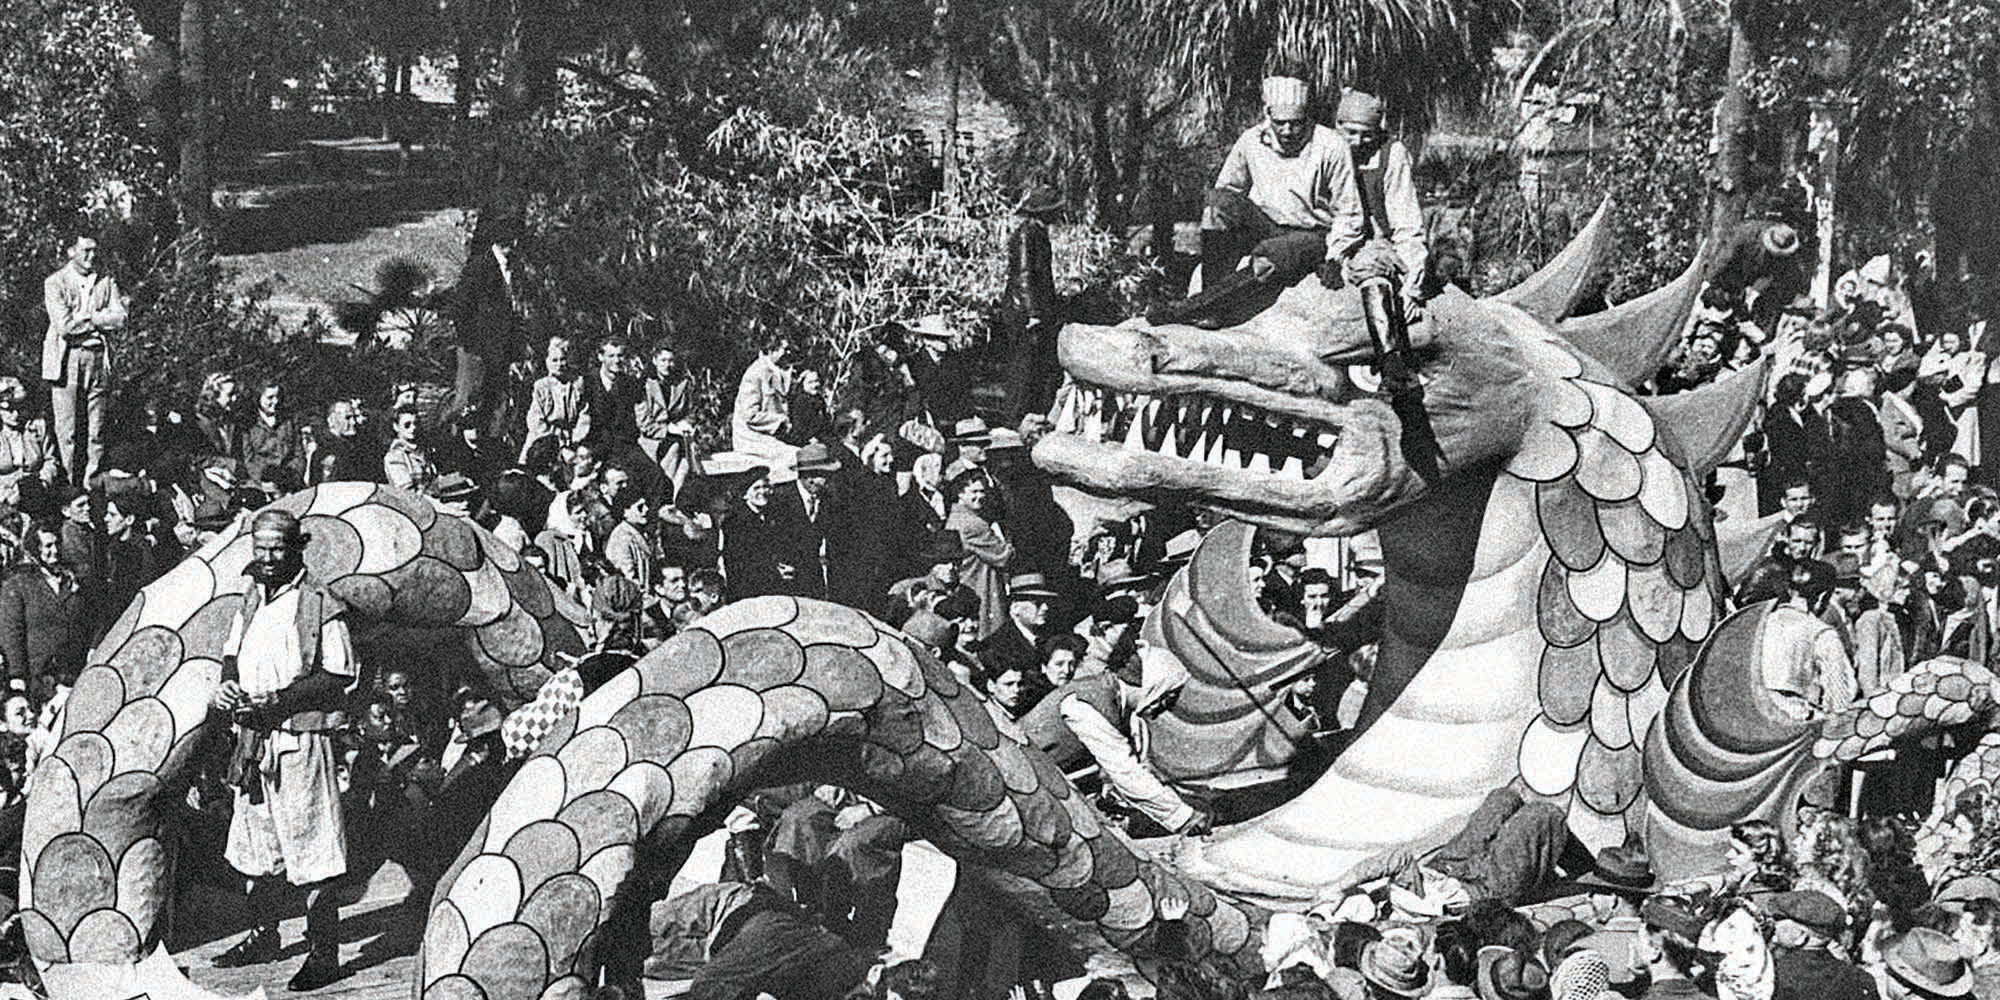 A dragon float makes its way through the parade in the late 1950s near Tampa Bay Hotel (University of Tampa). h. Several social events were part of the overall Gasparilla season. Pictured is a 1924 invitation to the annual Pirates Ball, one of the more important gatherings held before the invasion and parade. Photo courtesy of Tampa Bay History Center Collection